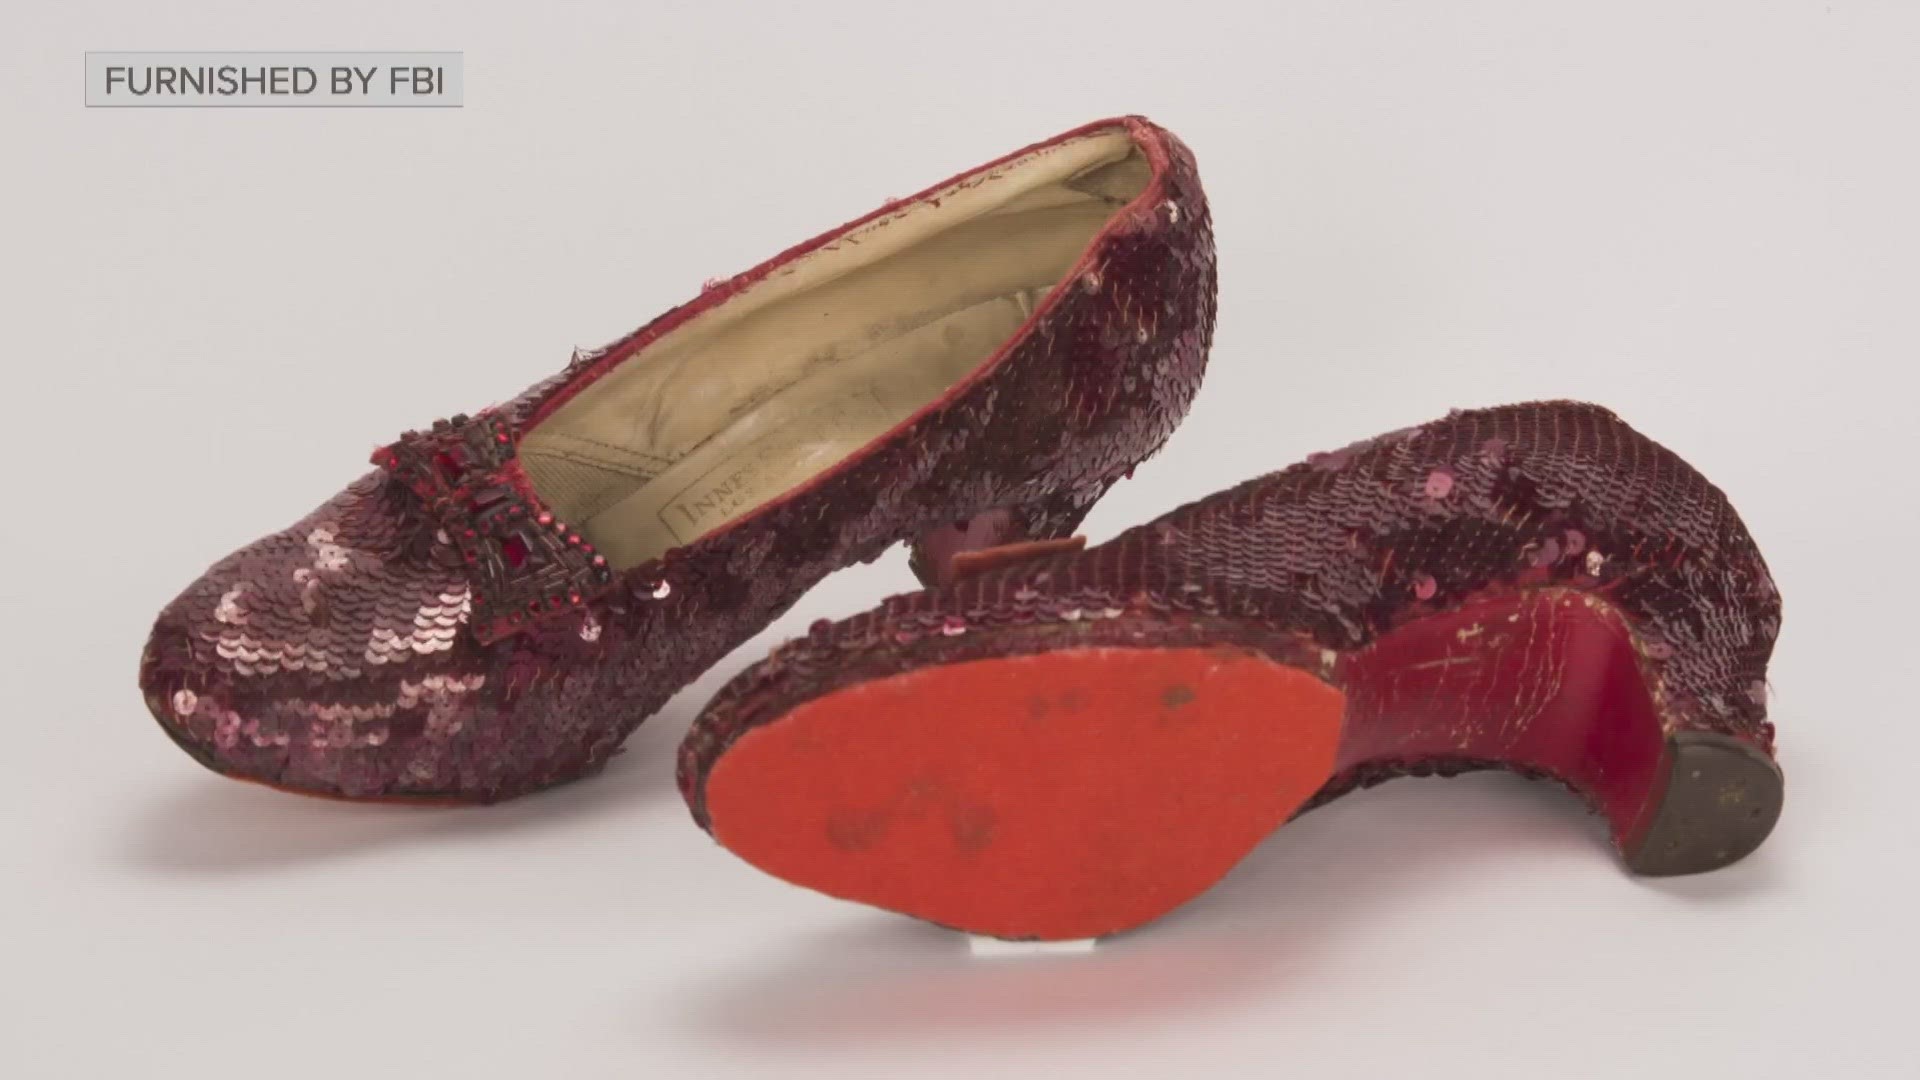 The iconic ruby slippers were stolen from the Judy Garland Museum in 2005 and recovered in a sting operation 13 years later, but there had been no arrests.